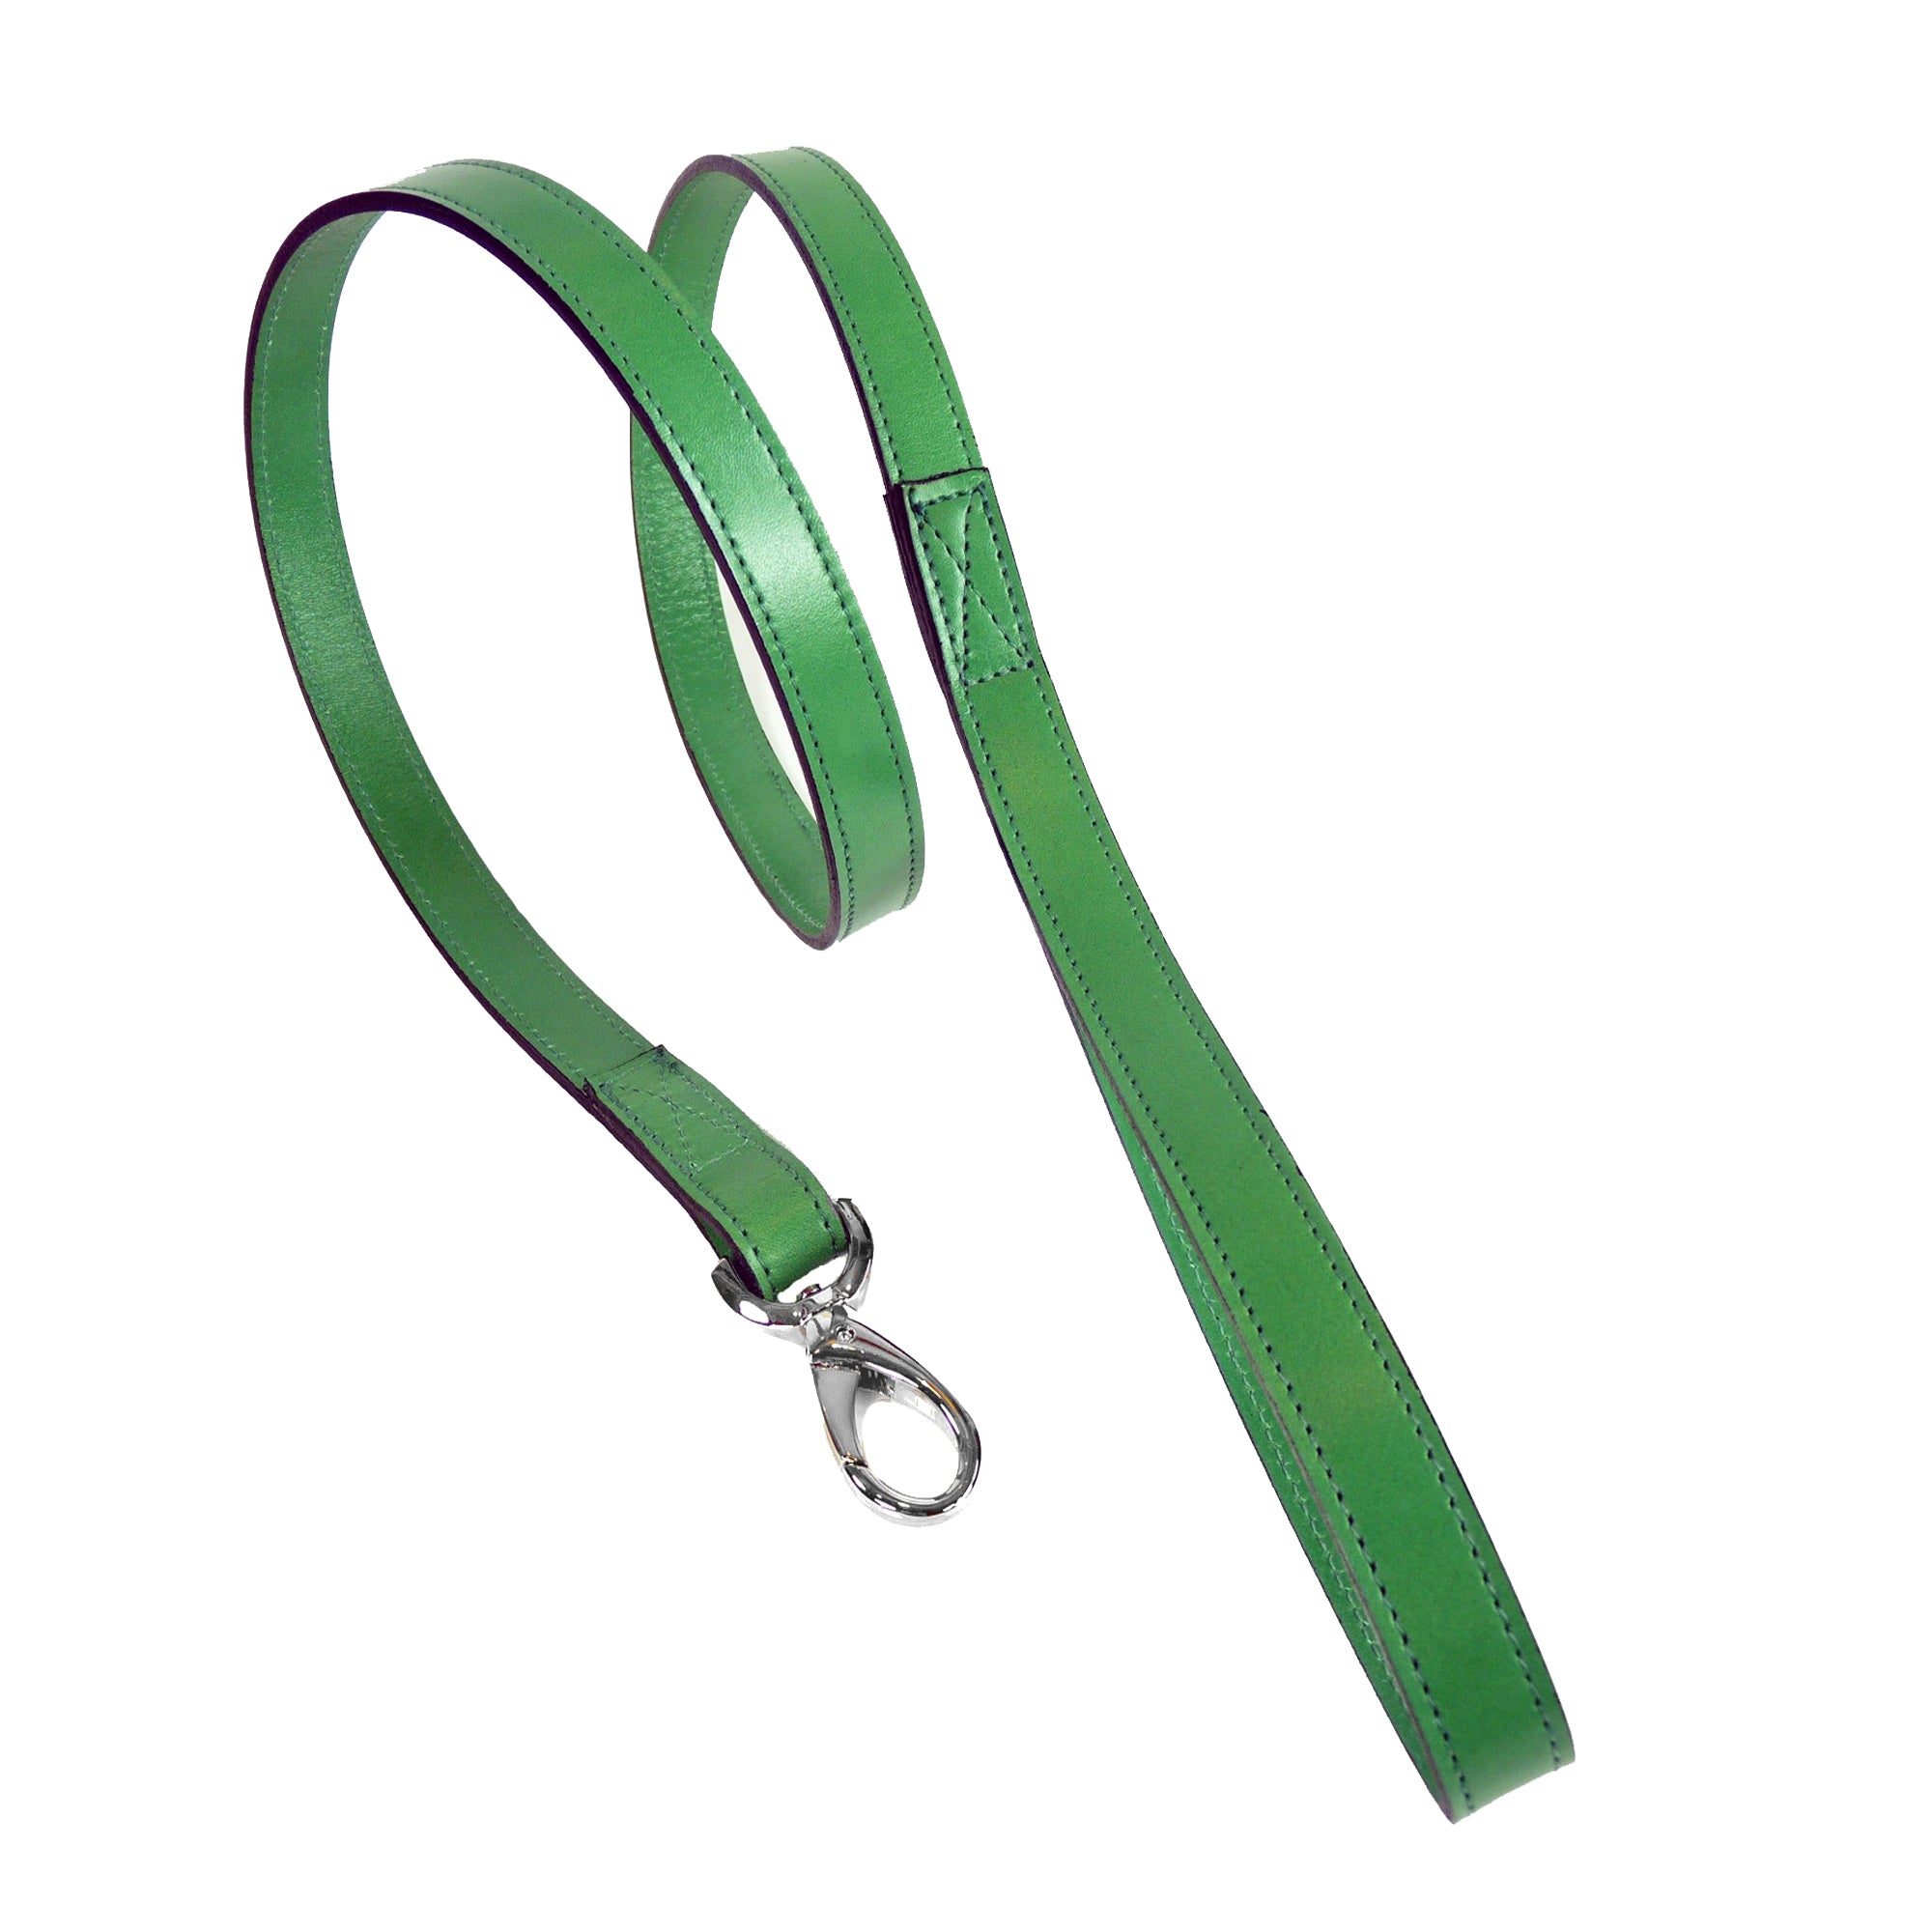 Haute Couture Octagon Lead in Kelly Green, Emerald & Nickel